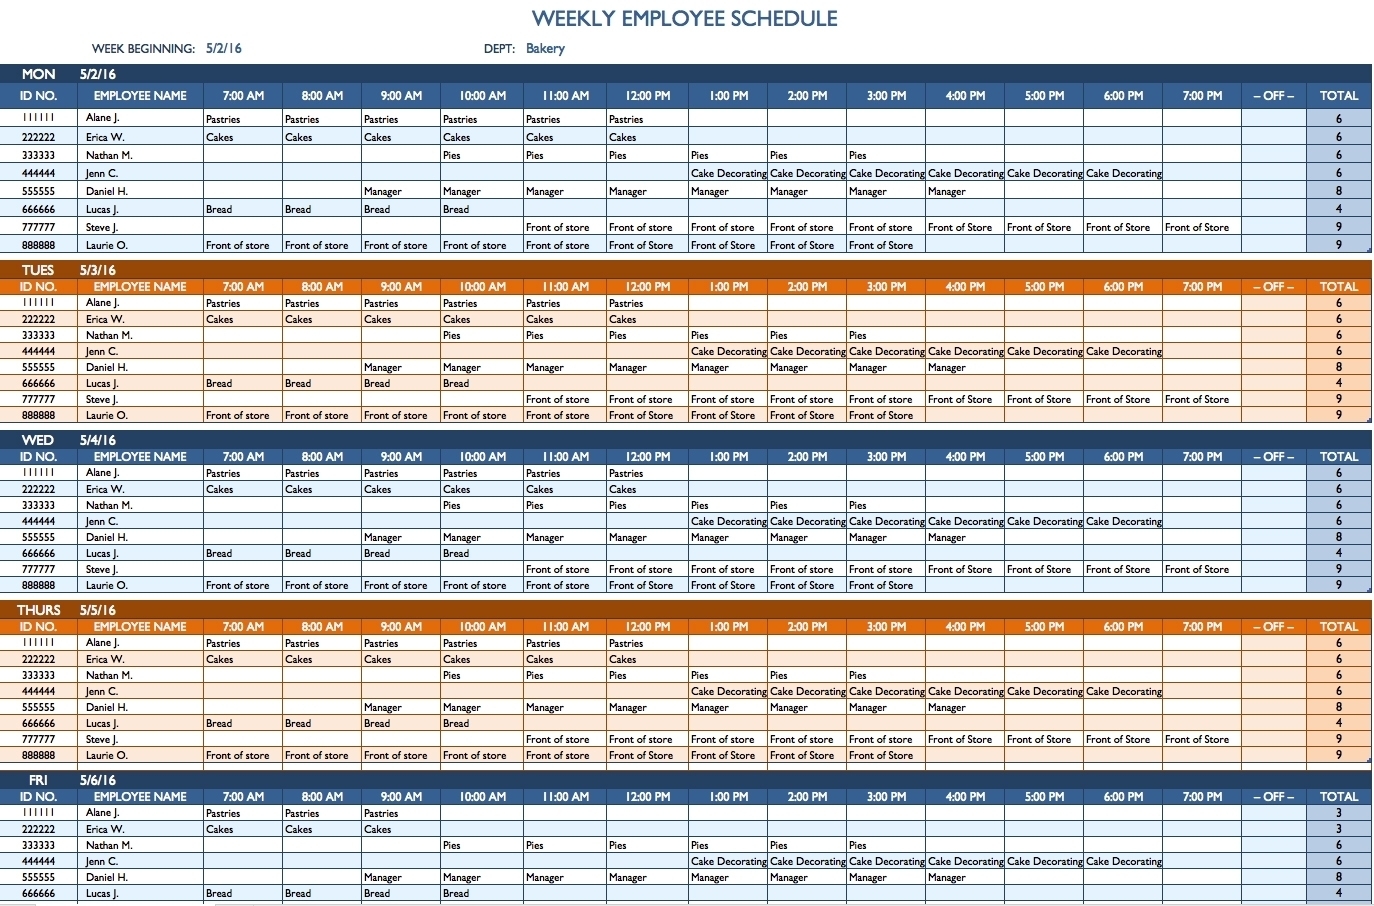 Annual Employee Planning Report Sample | Template Calendar Printable throughout Annual Employee Planning Report Sample